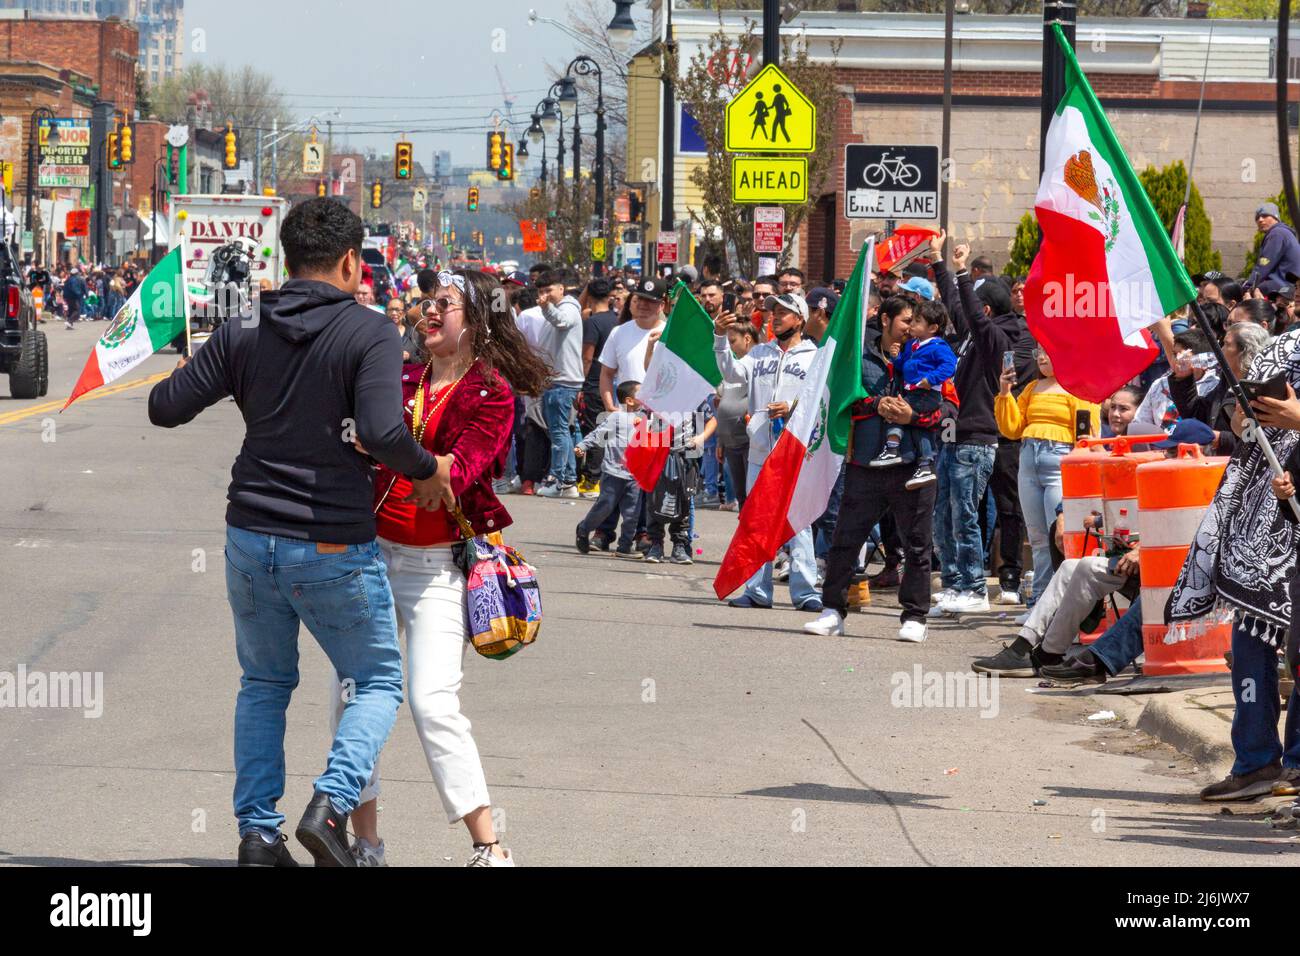 Detroit, Michigan USA - 1 May 2022 - A couple dances in the street as thousands lined Vernor Highway to watch the Cinco de Mayo parade in Detroit's Mexican-American neighborhood. The annual parade returned in 2022 after a two-year hiatus due to the pandemic. Cinco de Mayo celebrates a Mexican victory over the French on May 5, 1862. Credit: Jim West/Alamy Live News Stock Photo